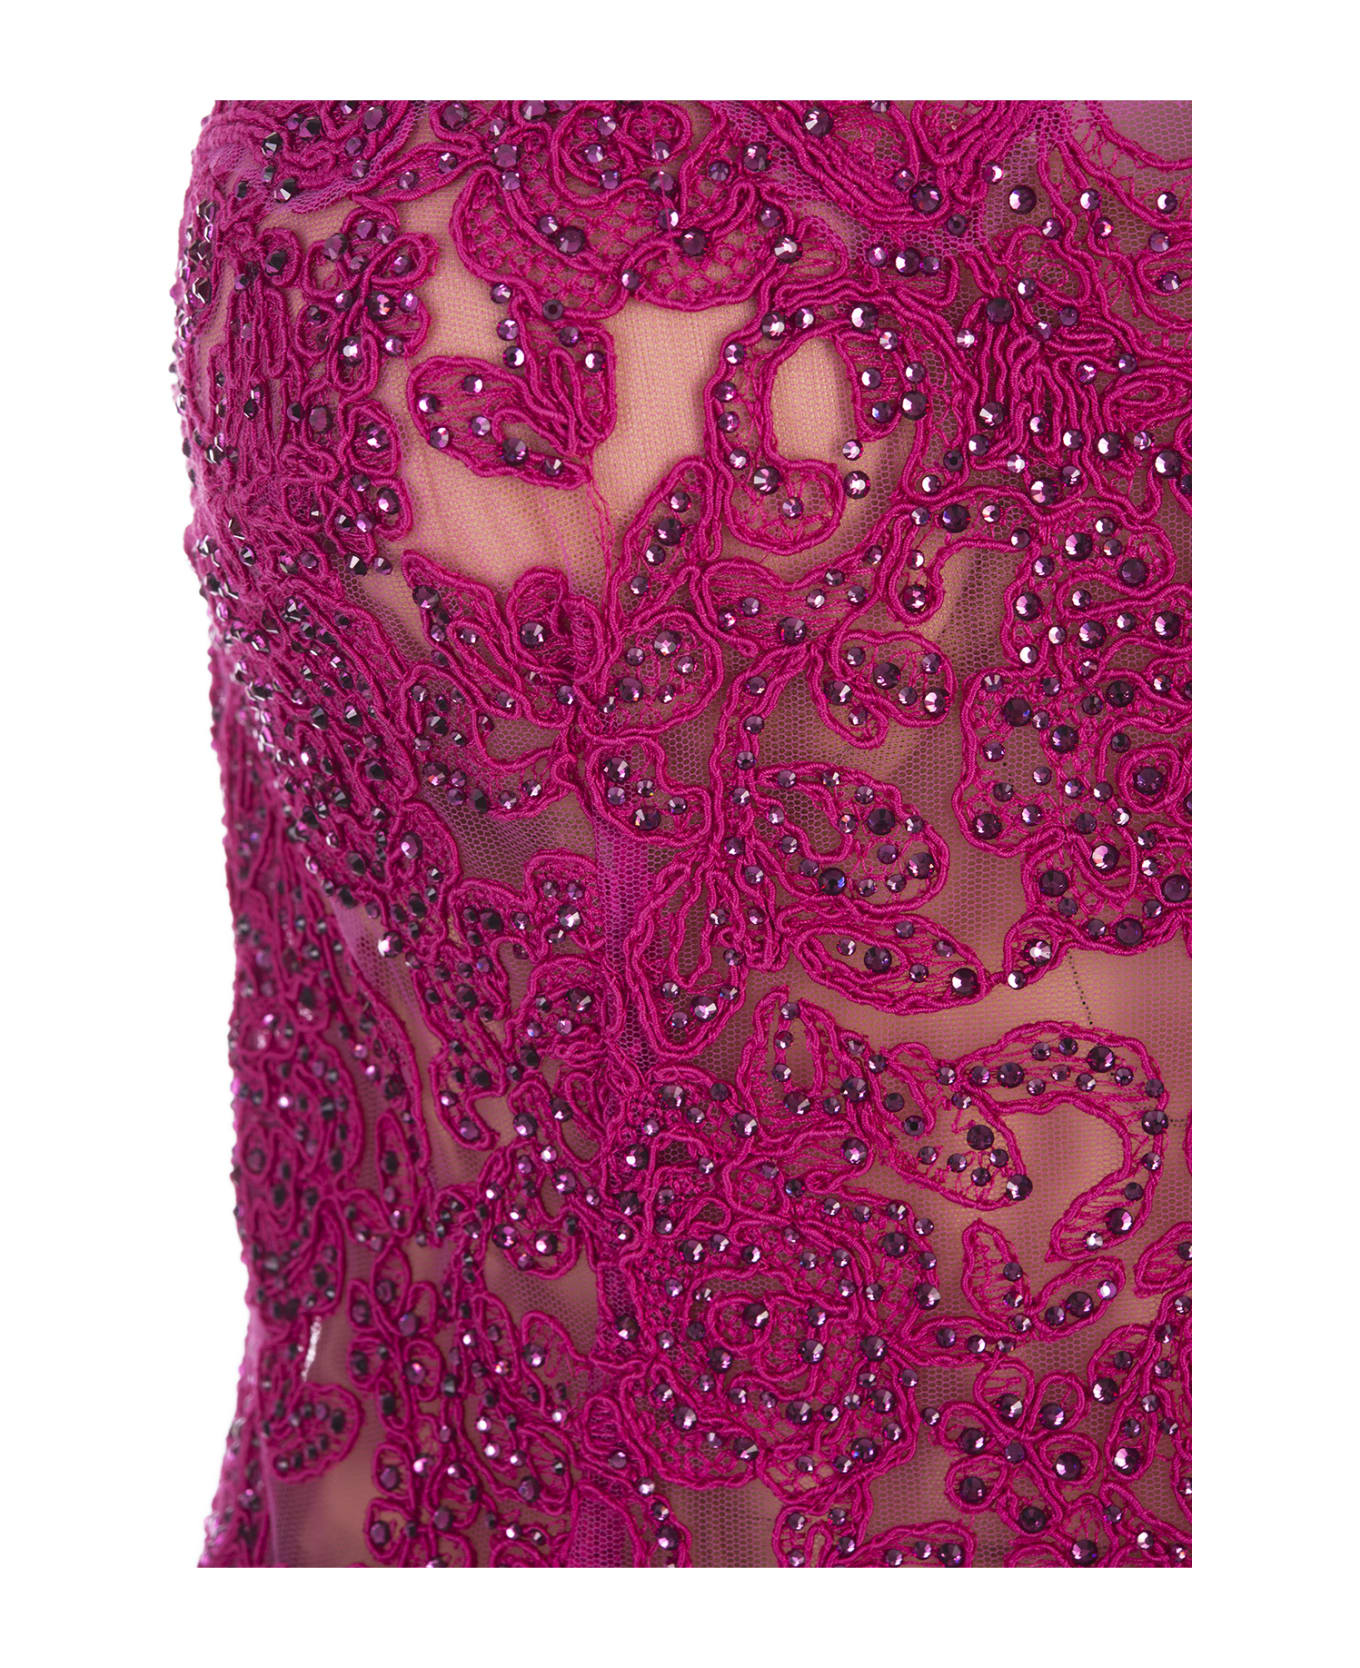 Ermanno Scervino Fuchsia Lace Longuette Dress With Micro Crystals - Pink